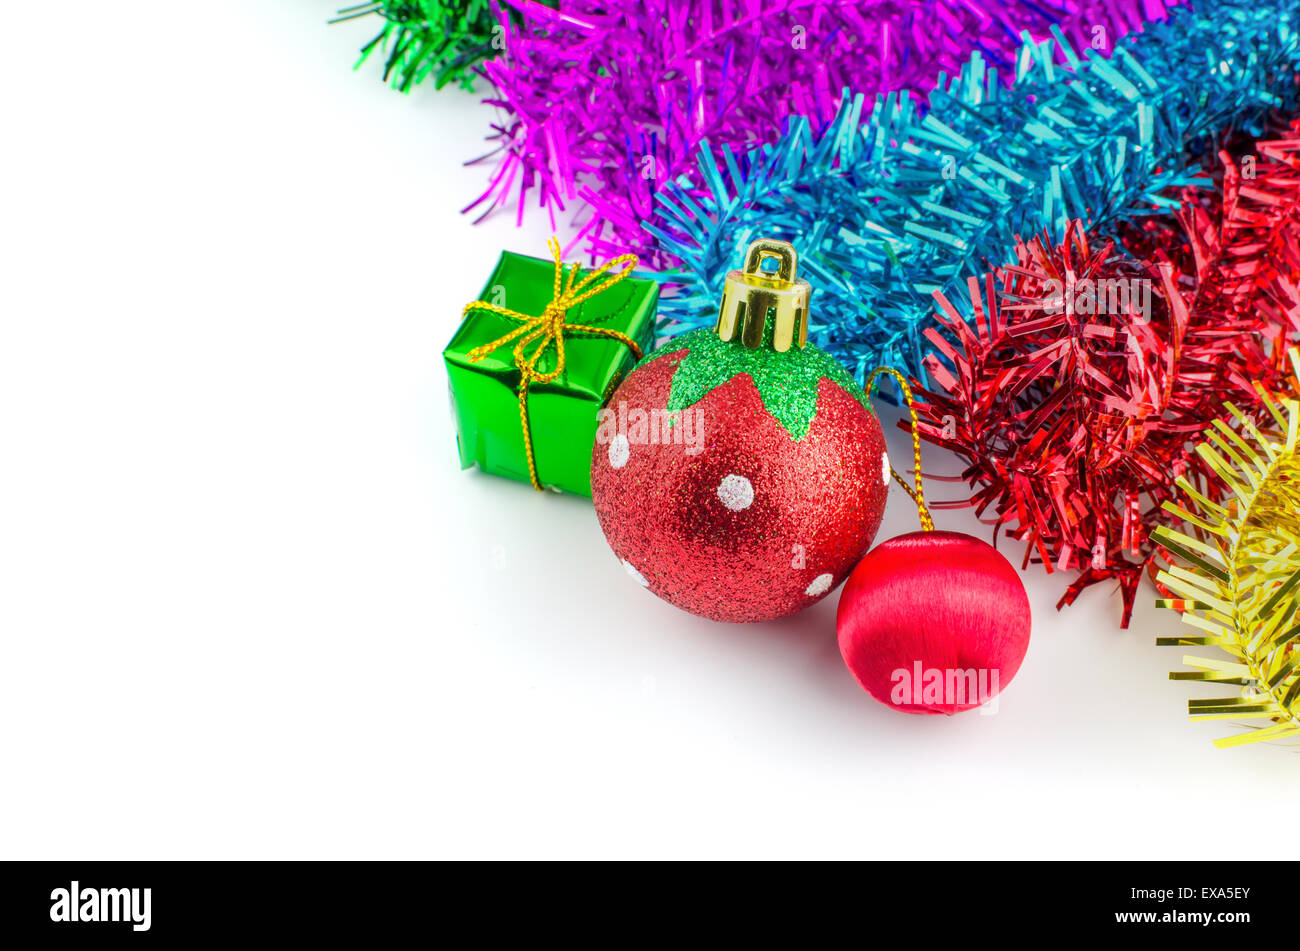 Christmas ball and Christmas decorations on white background Stock Photo